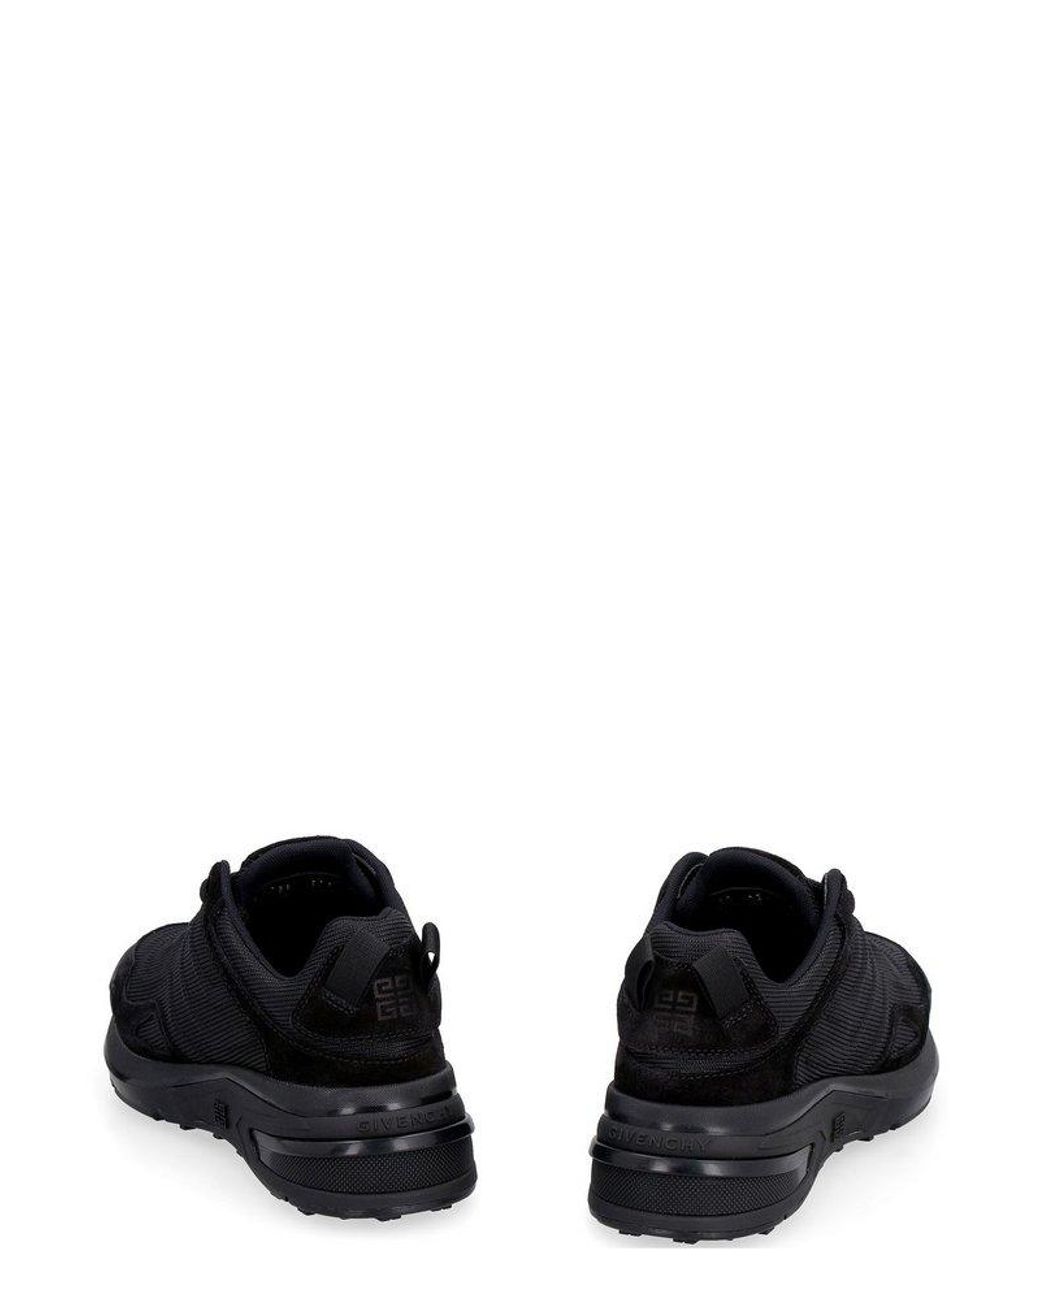 Givenchy Giv 1 Low-top Sneakers in Black | Lyst